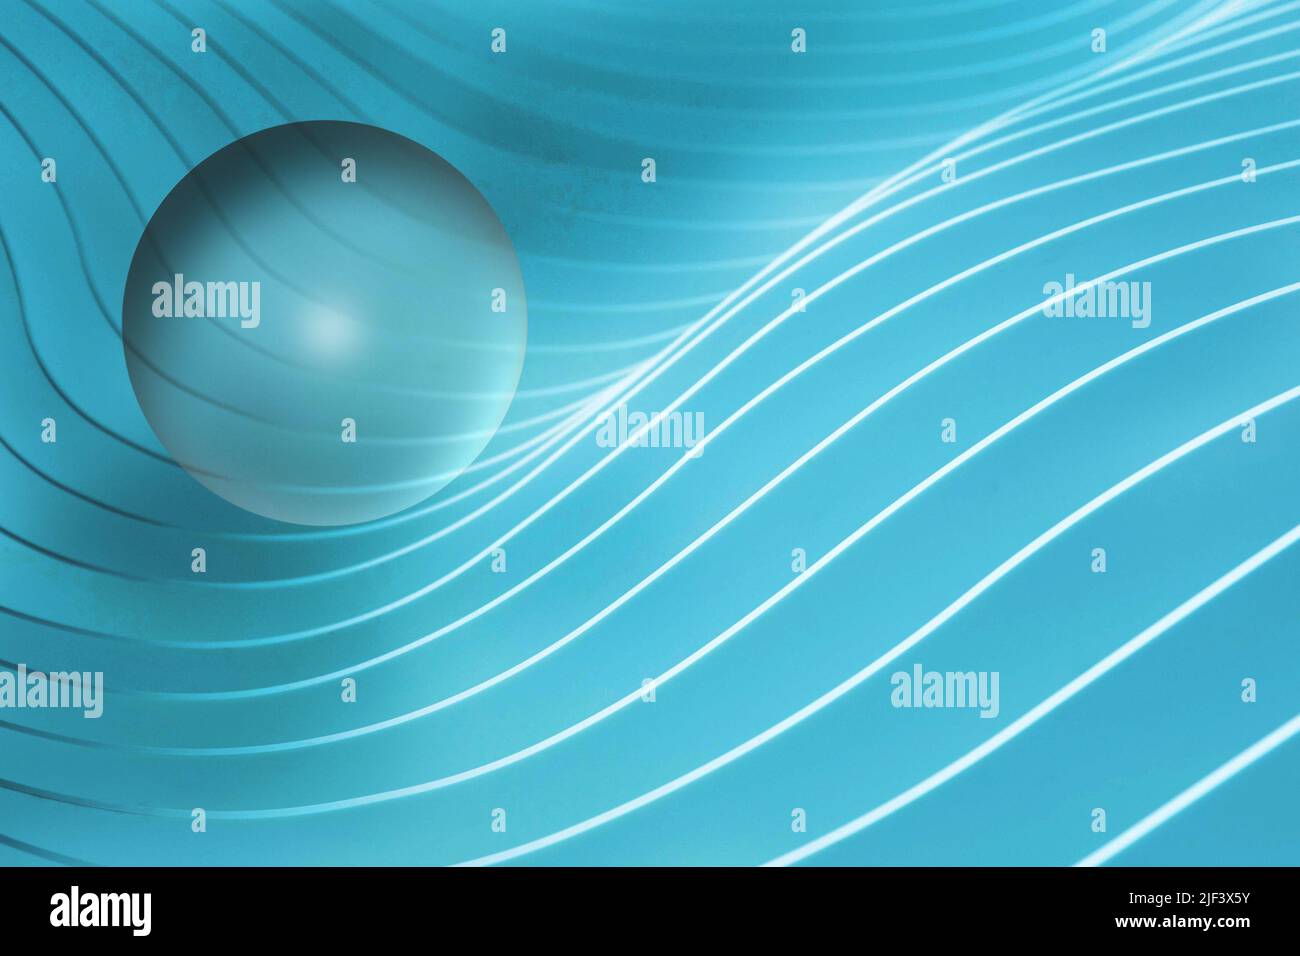 blue sphere and wavy lines backdrop Stock Photo